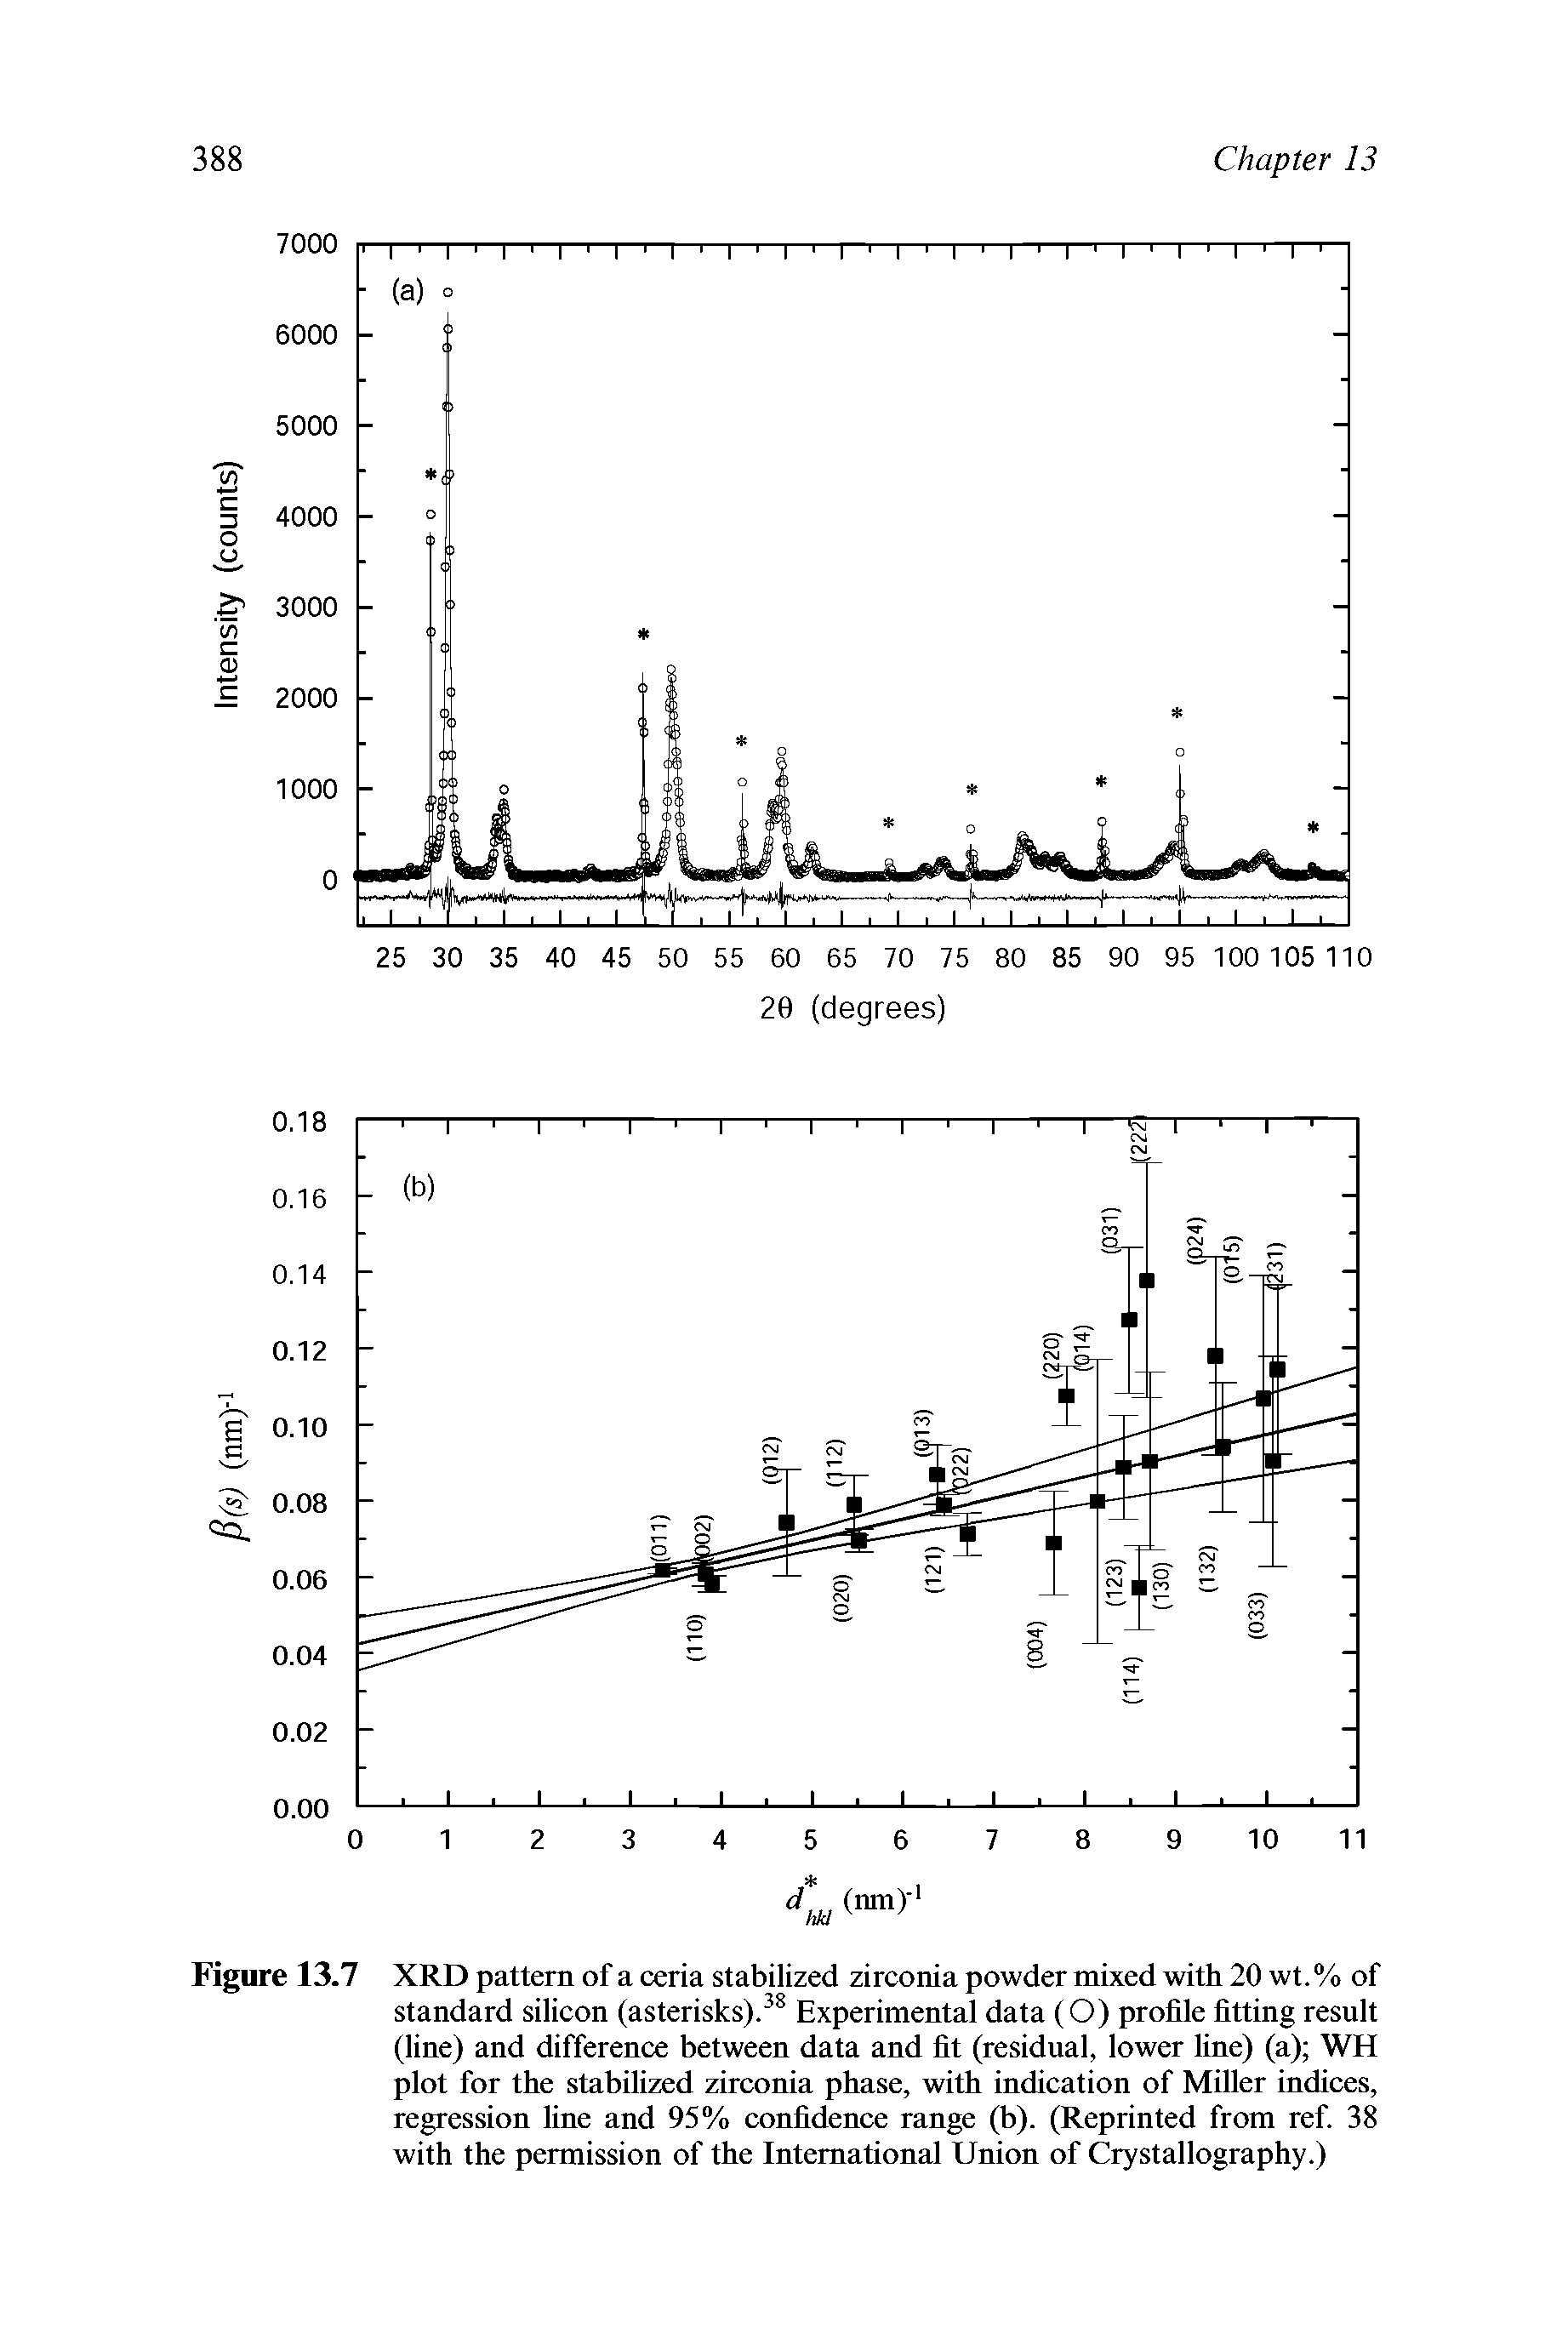 Figure 13.7 XRD pattern of a ceria stabilized zirconia powder mixed with 20 wt.% of standard silicon (asterisks). Experimental data (O) profile fitting result (line) and difference between data and fit (residual, lower line) (a) WH plot for the stabilized zirconia phase, with indication of Miller indices, regression line and 95% confidence range (b). (Reprinted from ref. 38 with the permission of the International Union of Crystallography.)...